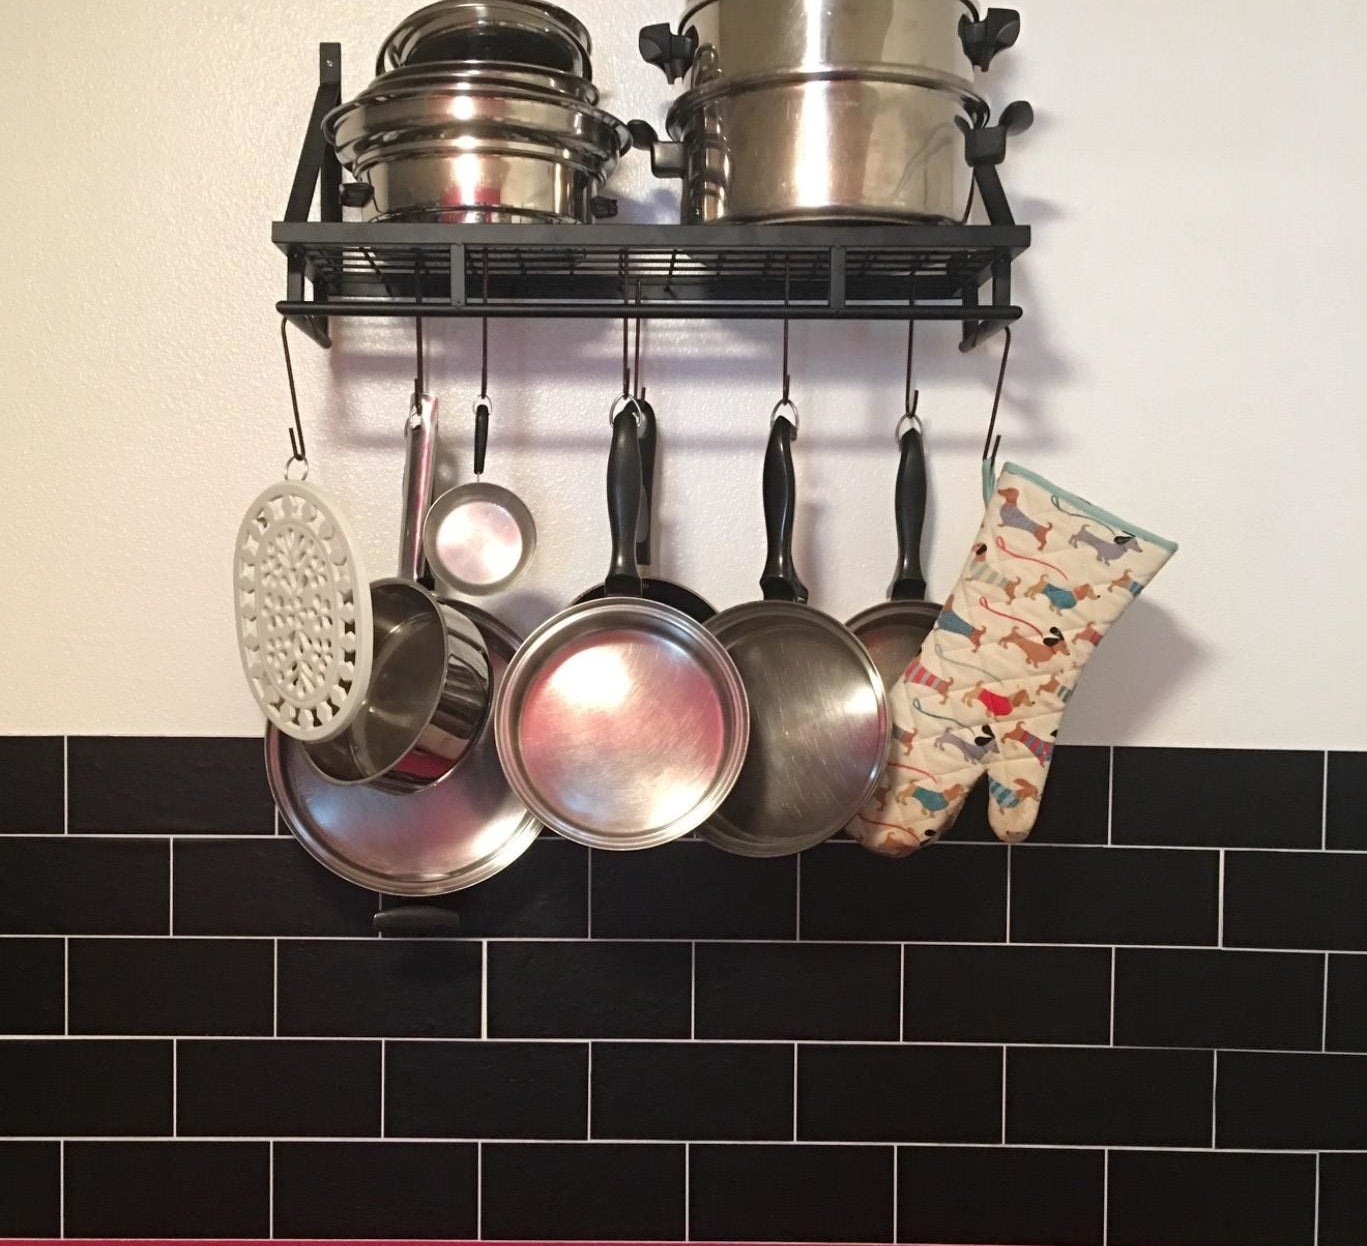 33 Products To Help You Keep Your Kitchen Organized